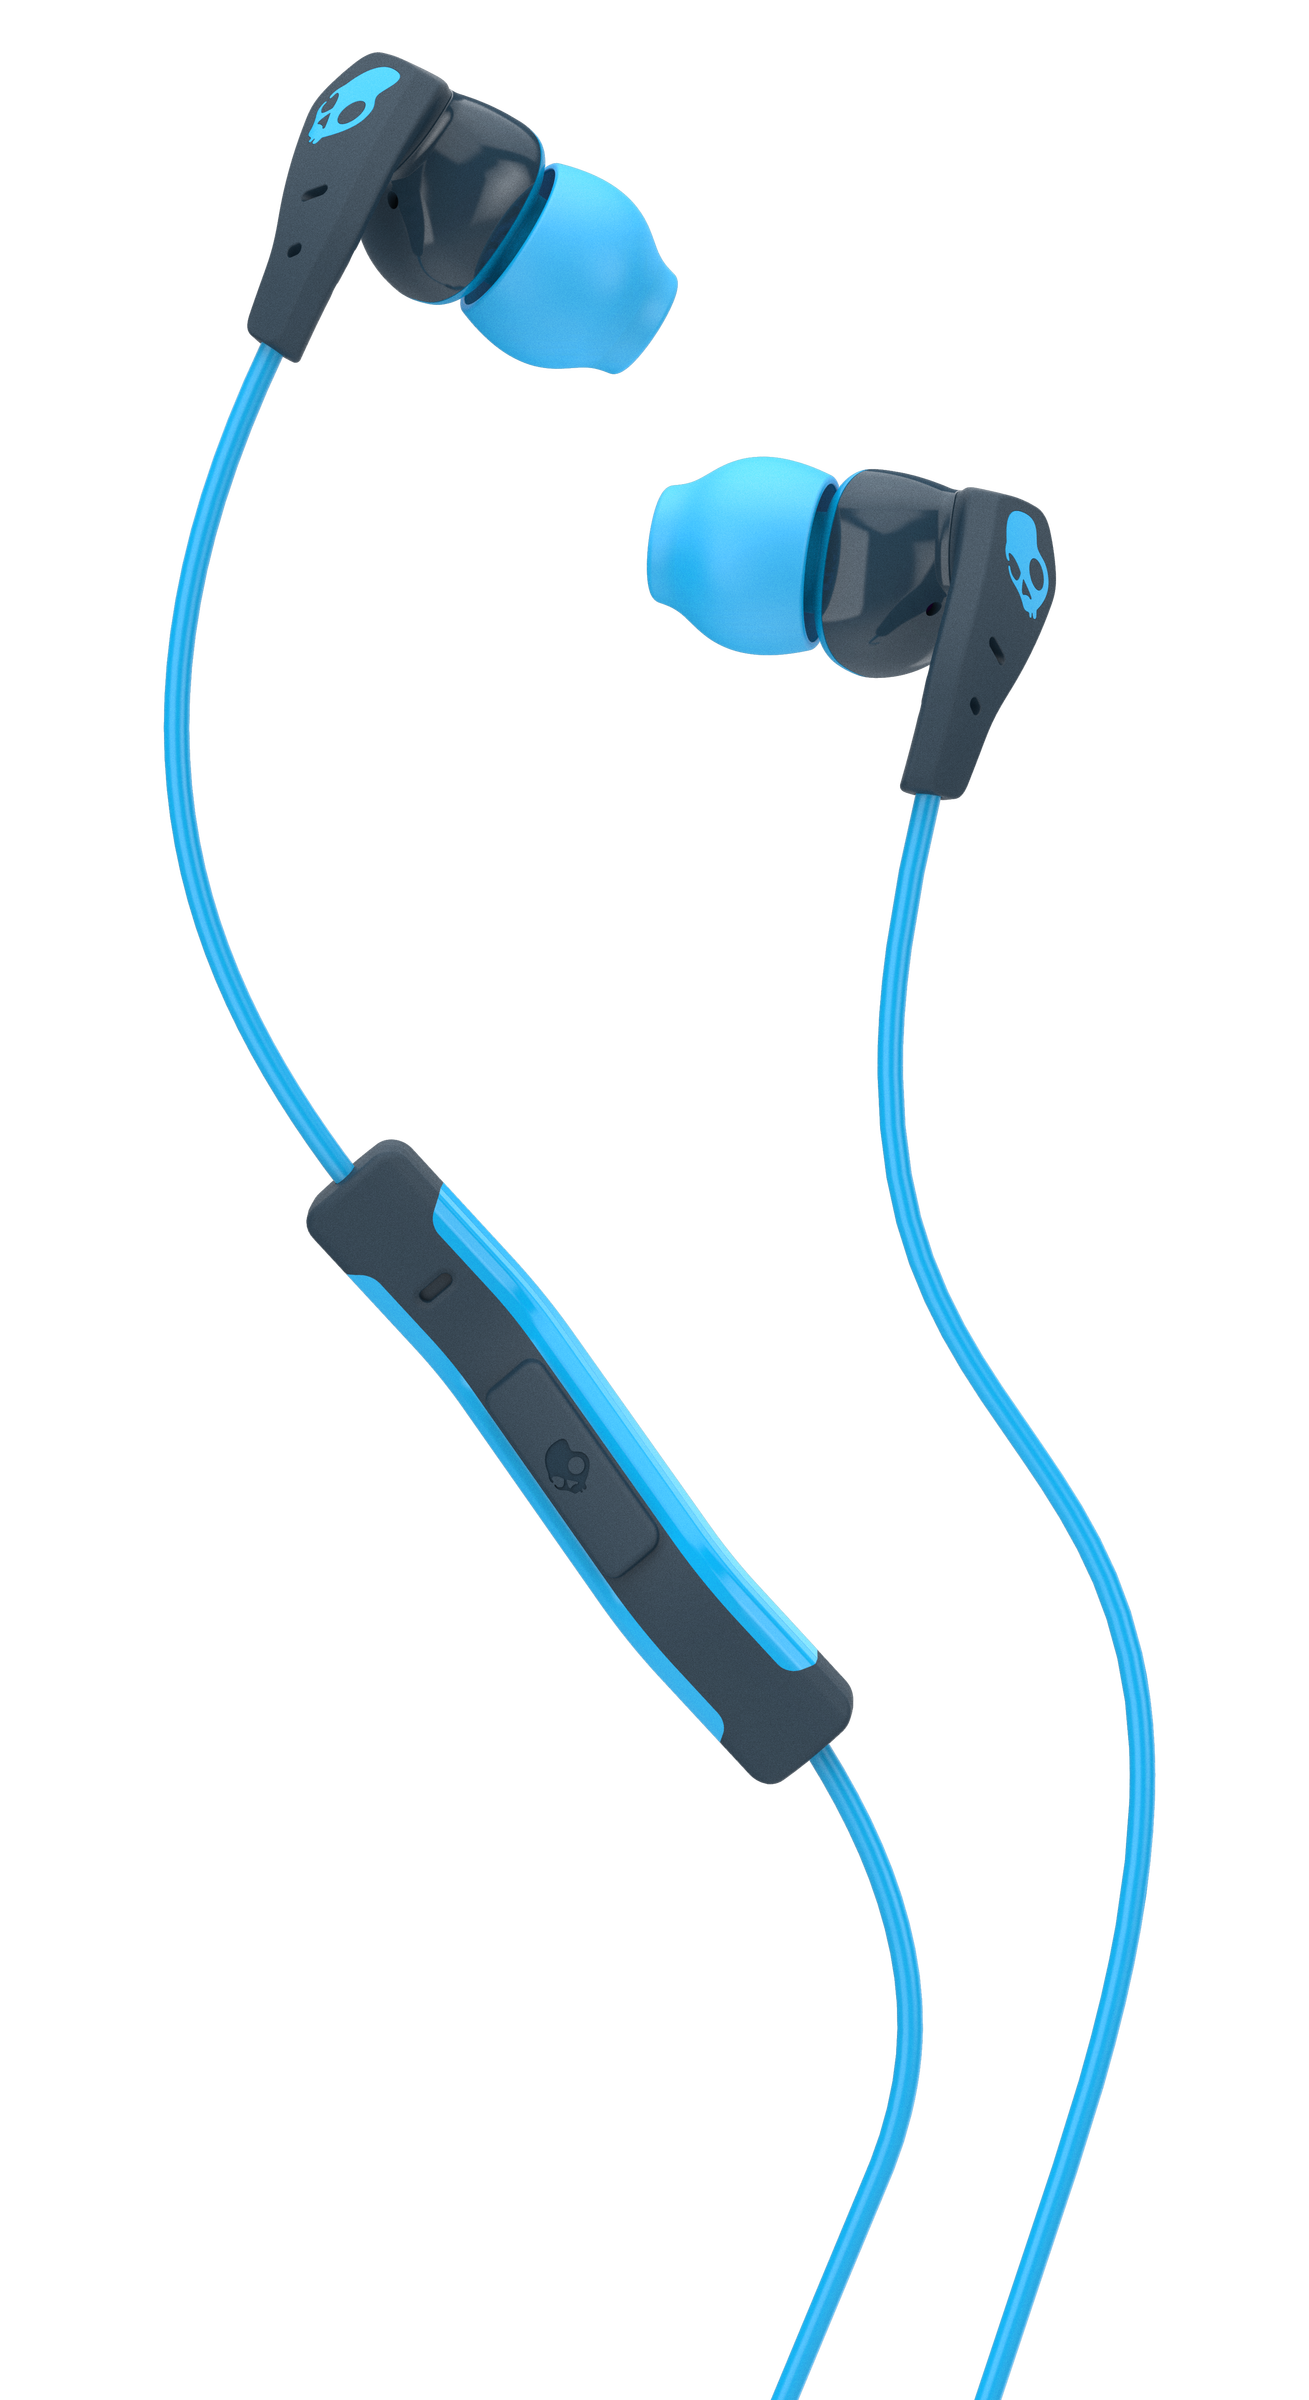 Download PNG image - Mobile Earphone PNG HD 